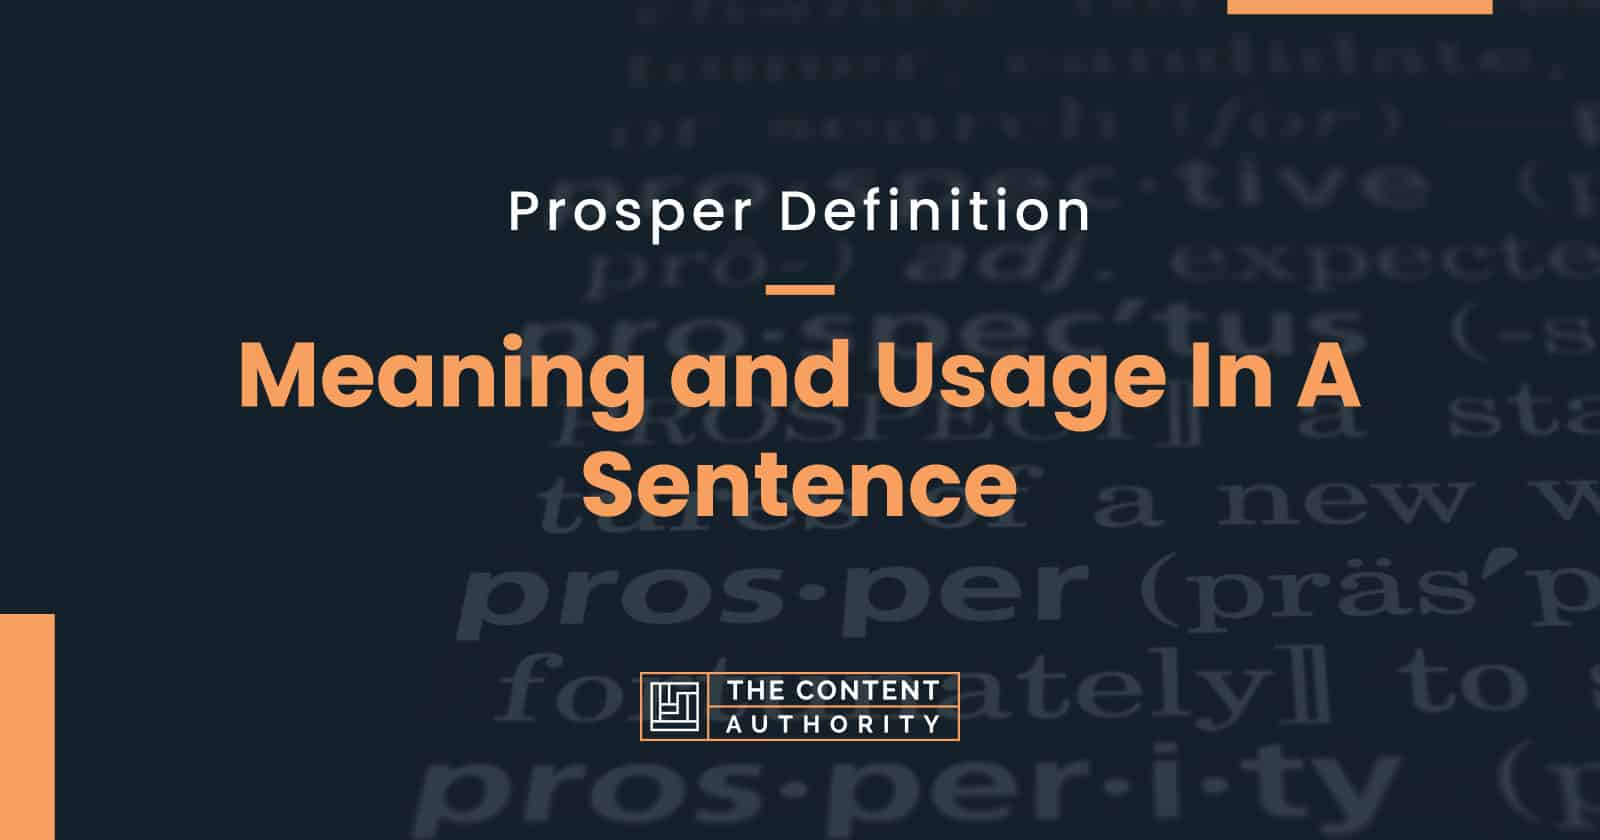 Prosper Definition – Meaning and Usage In A Sentence